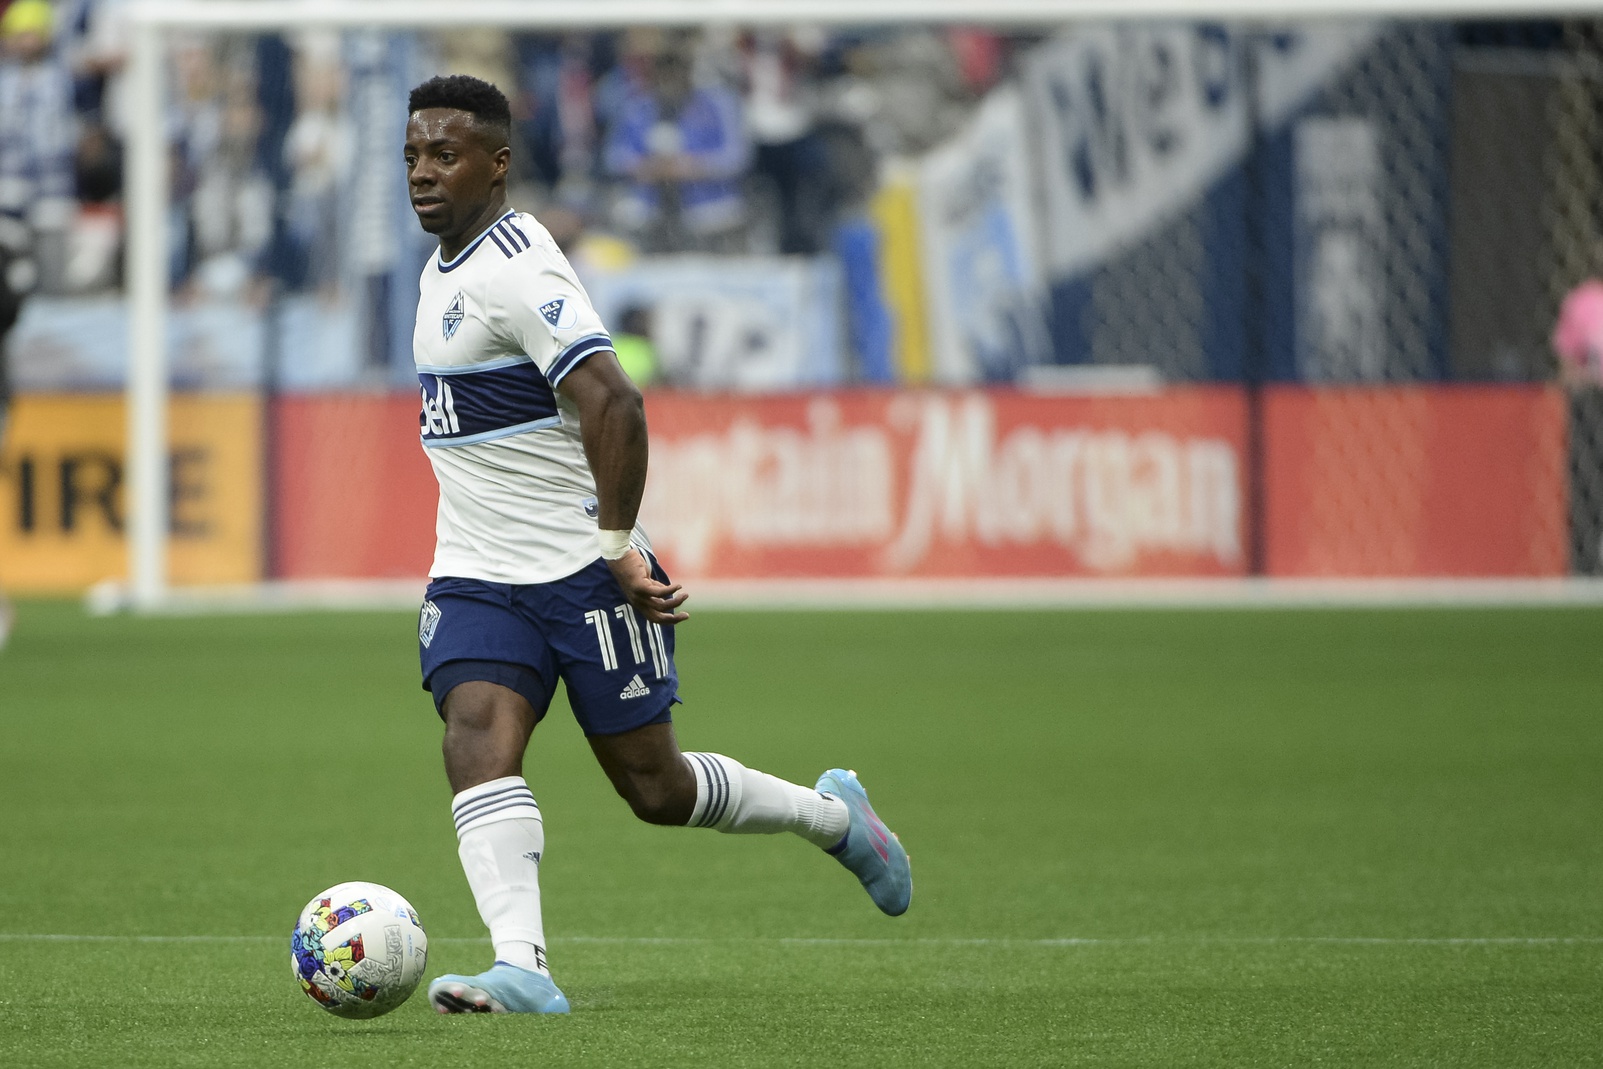 Vancouver Whitecaps FC vs Chicago Fire Prediction, 7/23/2022 MLS Soccer Pick, Tips and Odds